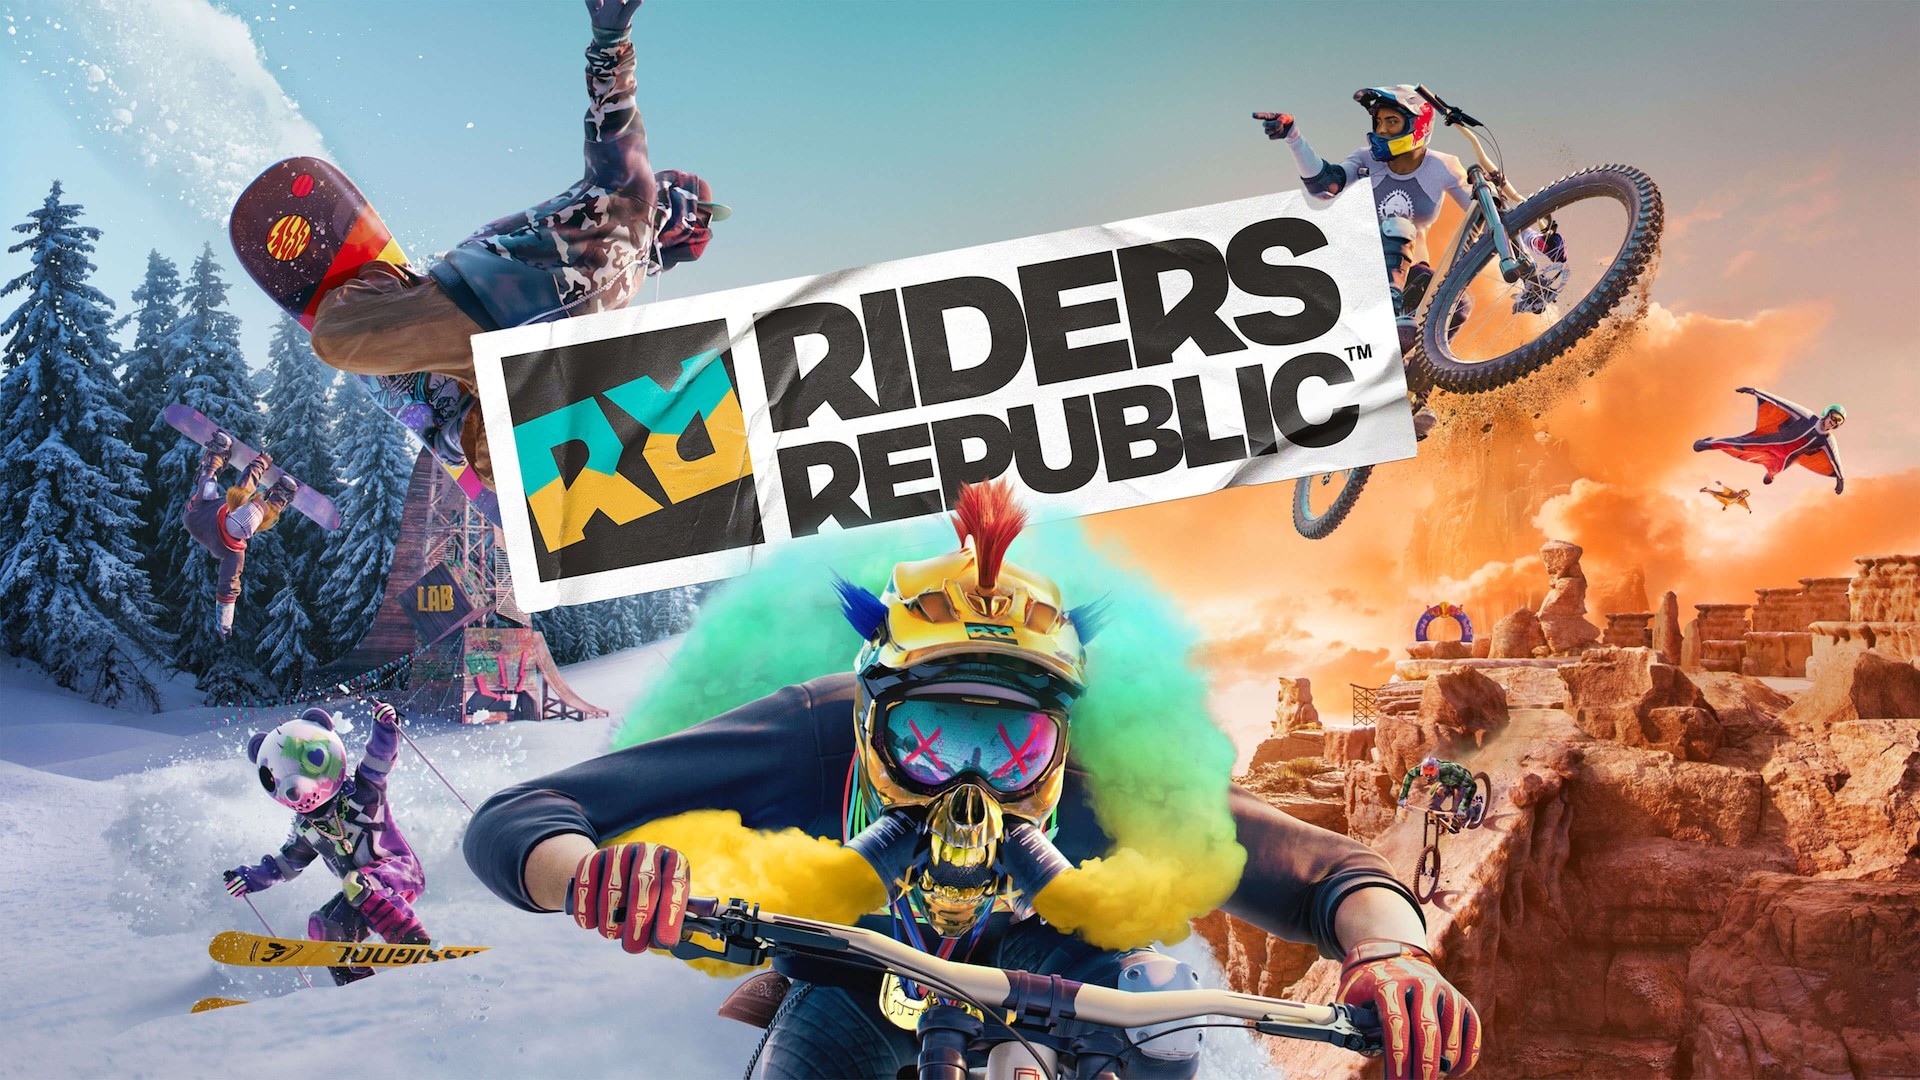 Riders Republic is (also) postponed indefinitely